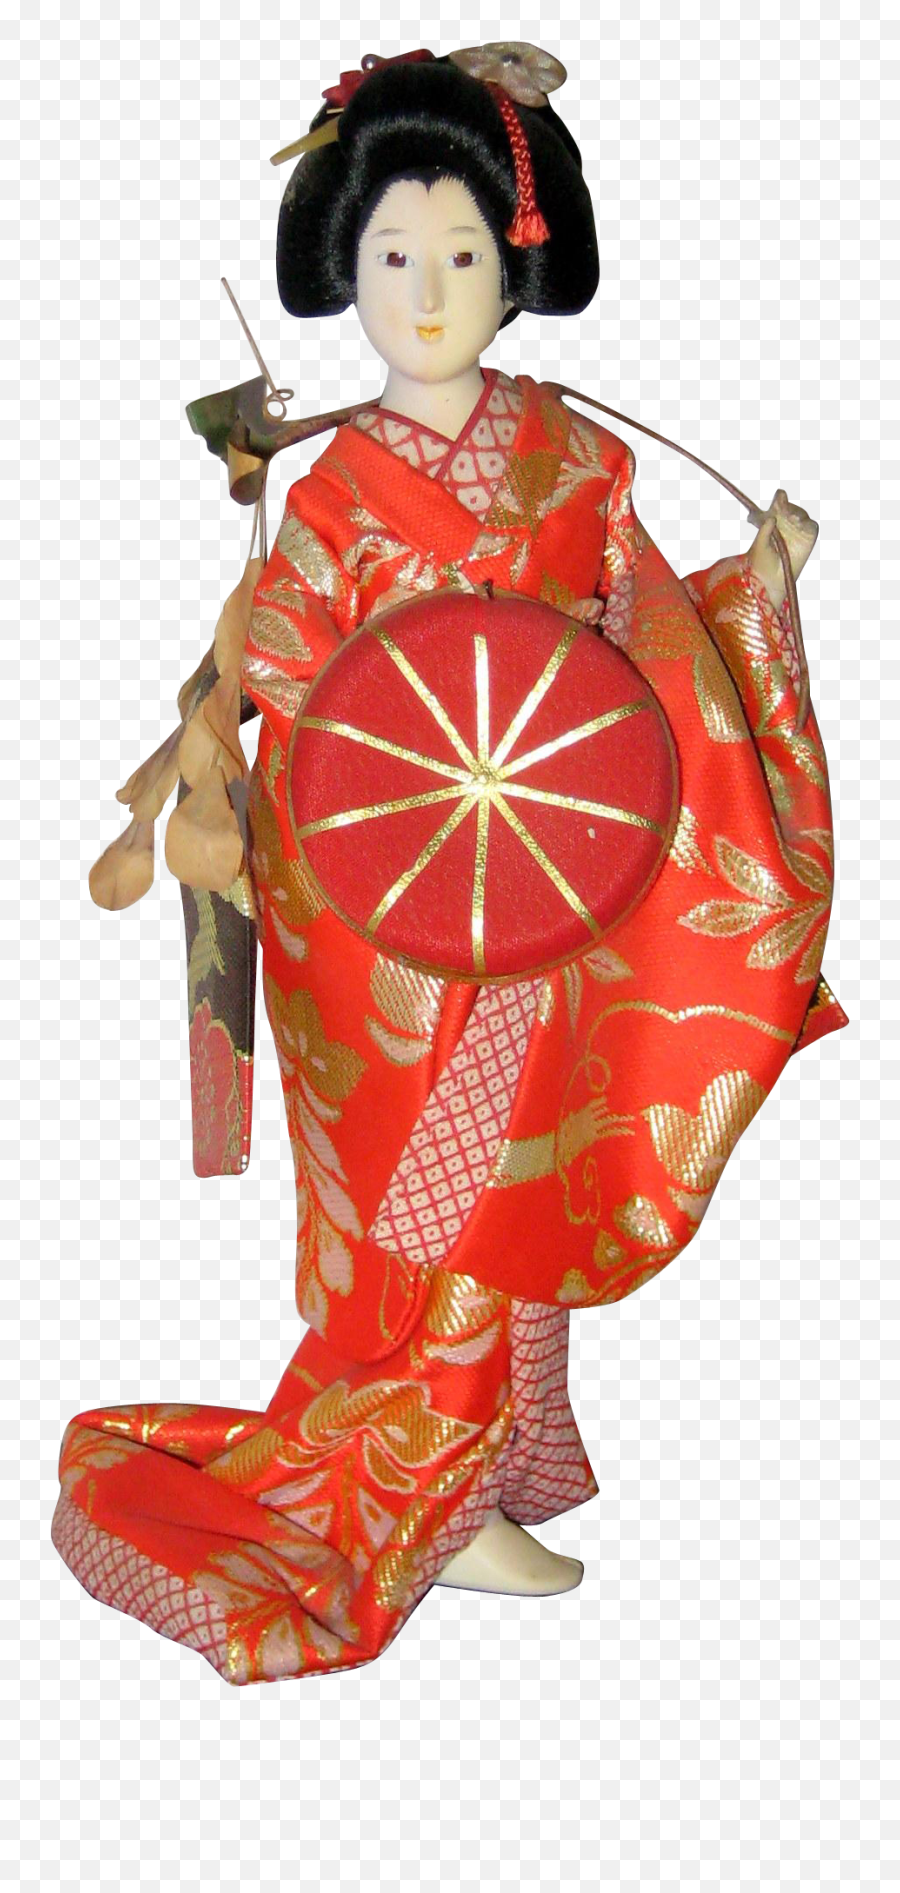 Japanese Doll Png Pic Mart - Japanese Doll Transparent Background,Doll Png